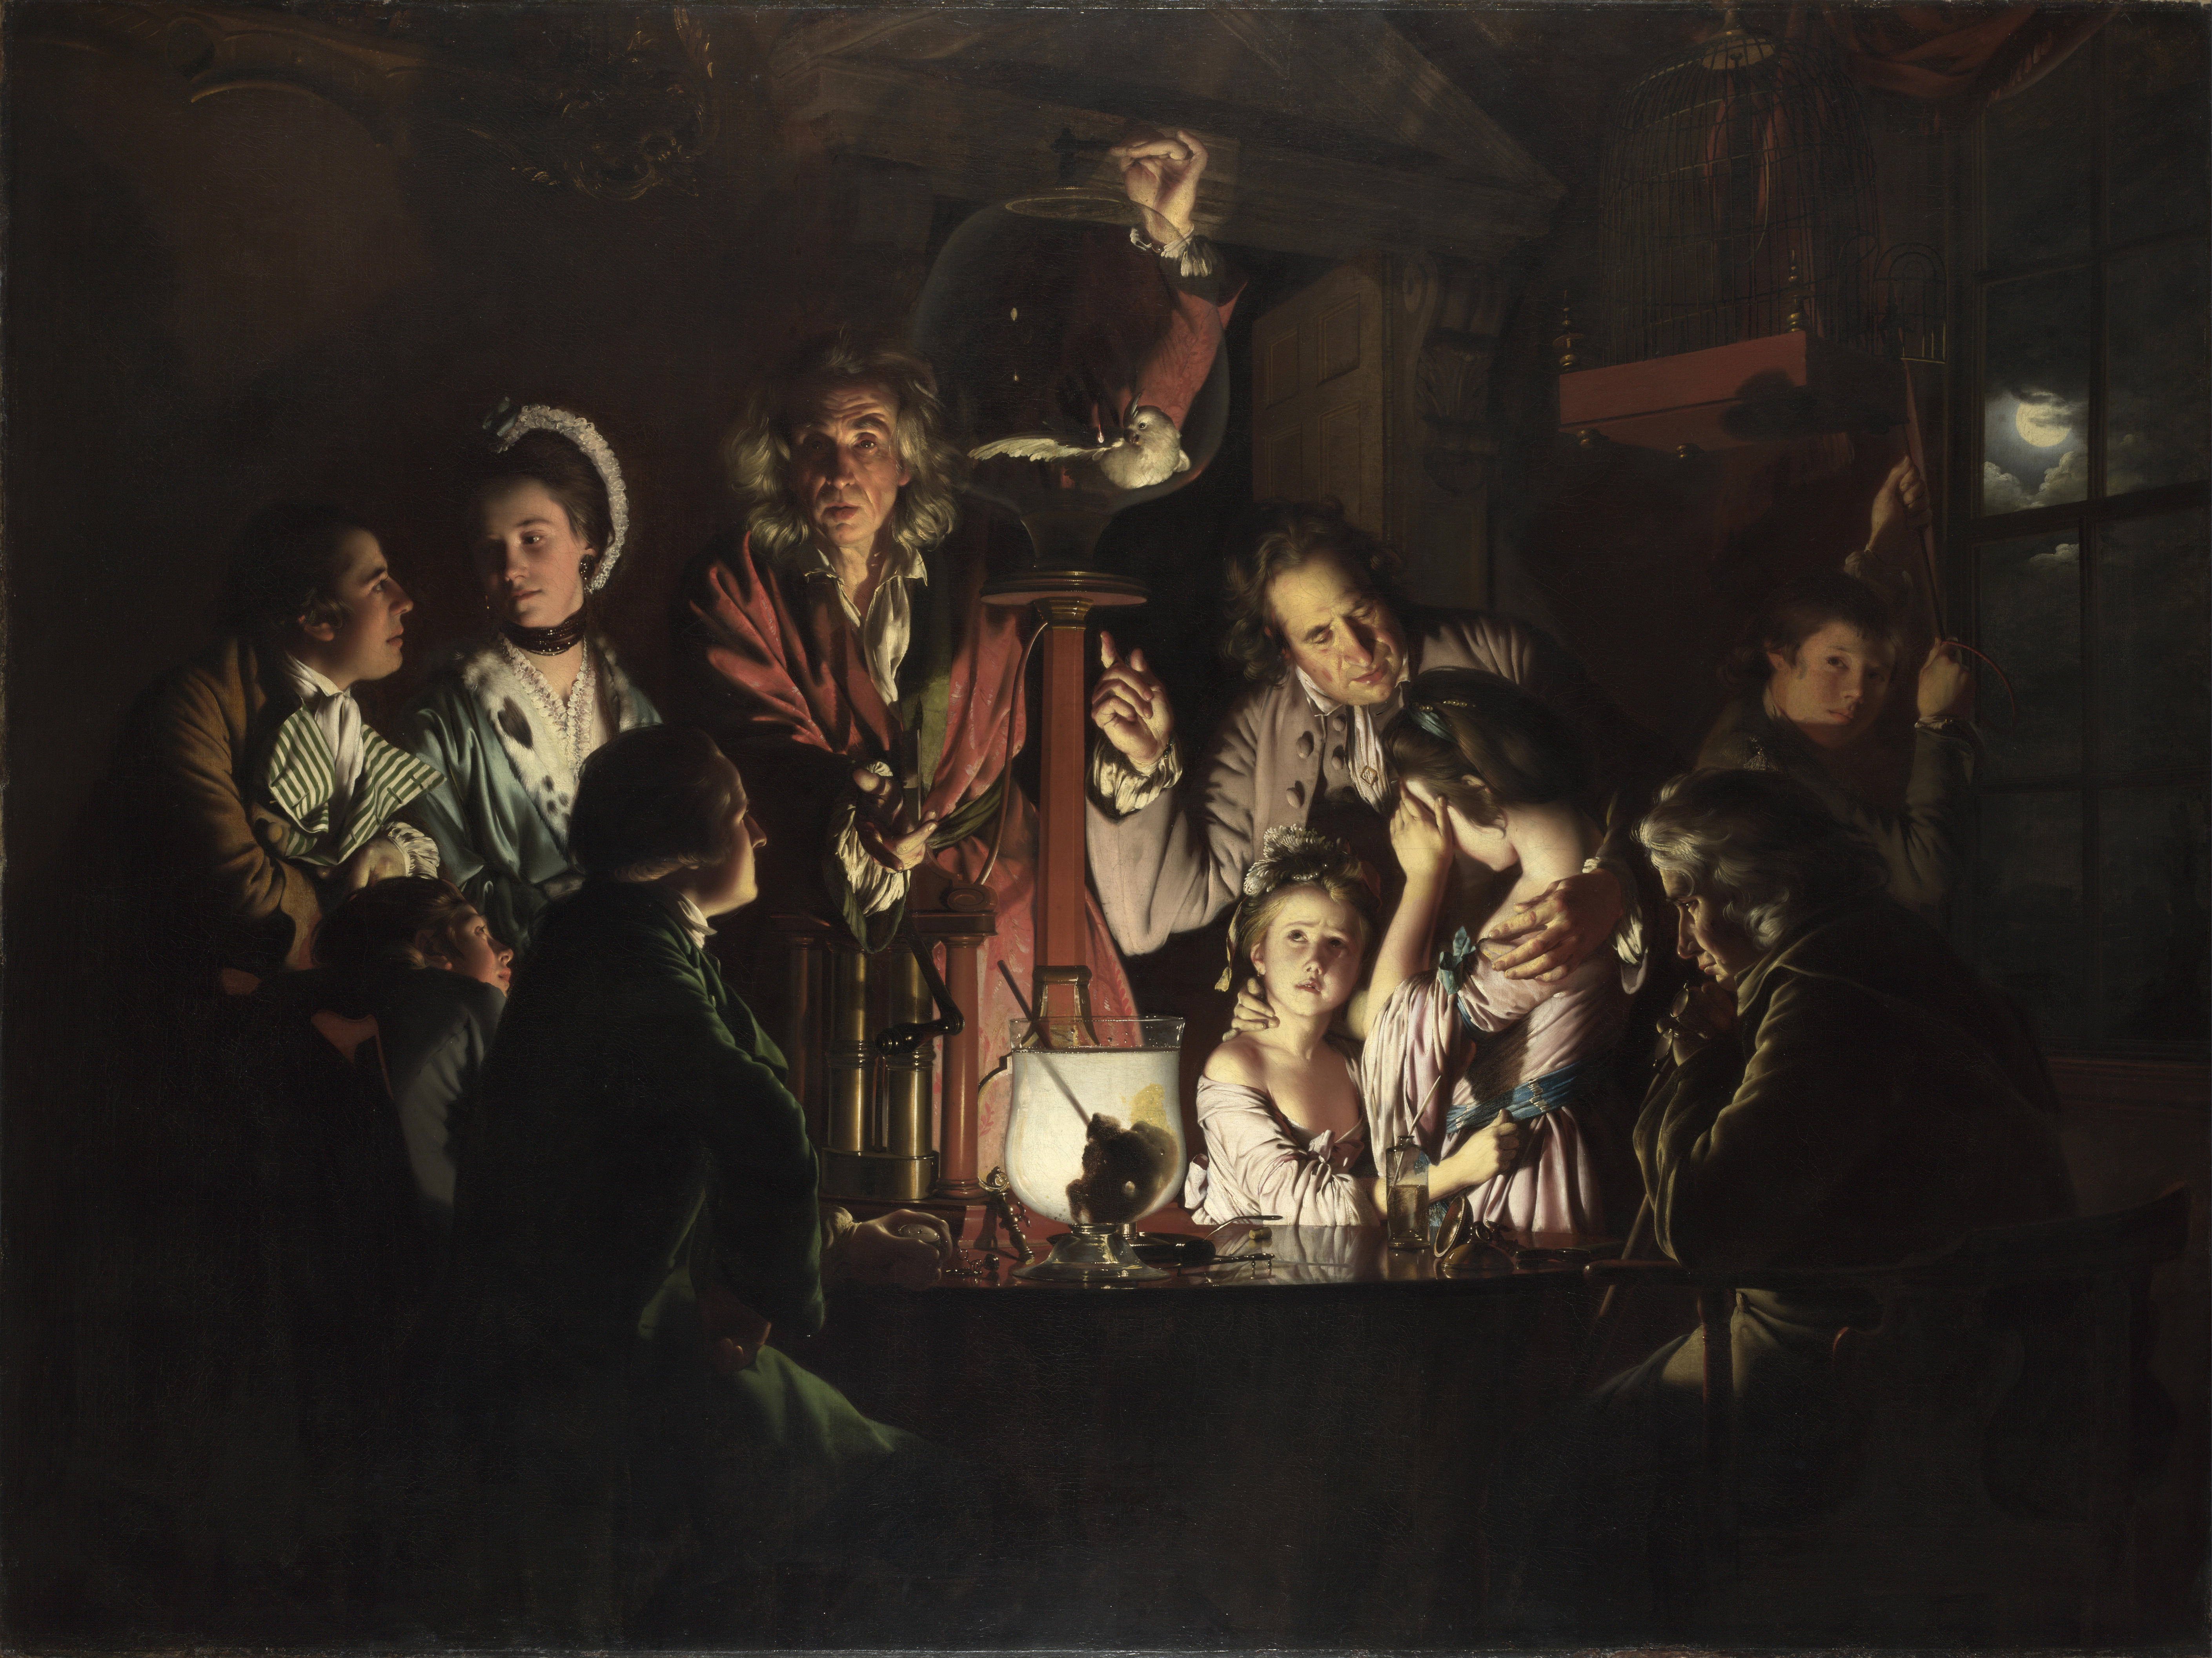 A painting of a group of people at a table with an air pump.